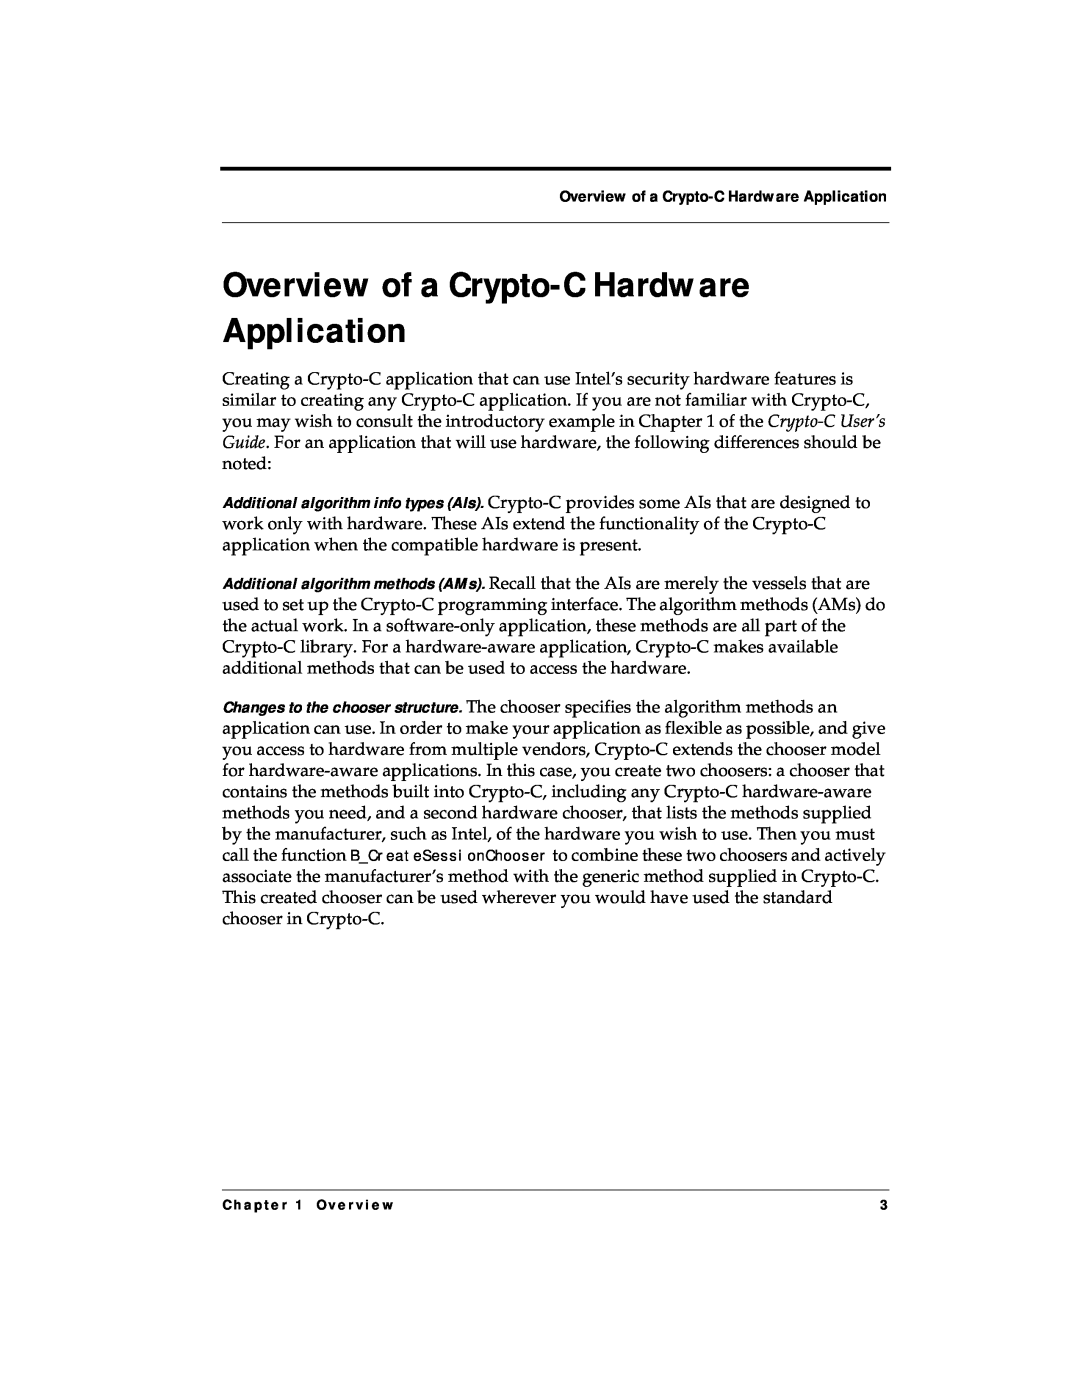 RSA Security 4.3 manual Overview of a Crypto-CHardware Application 